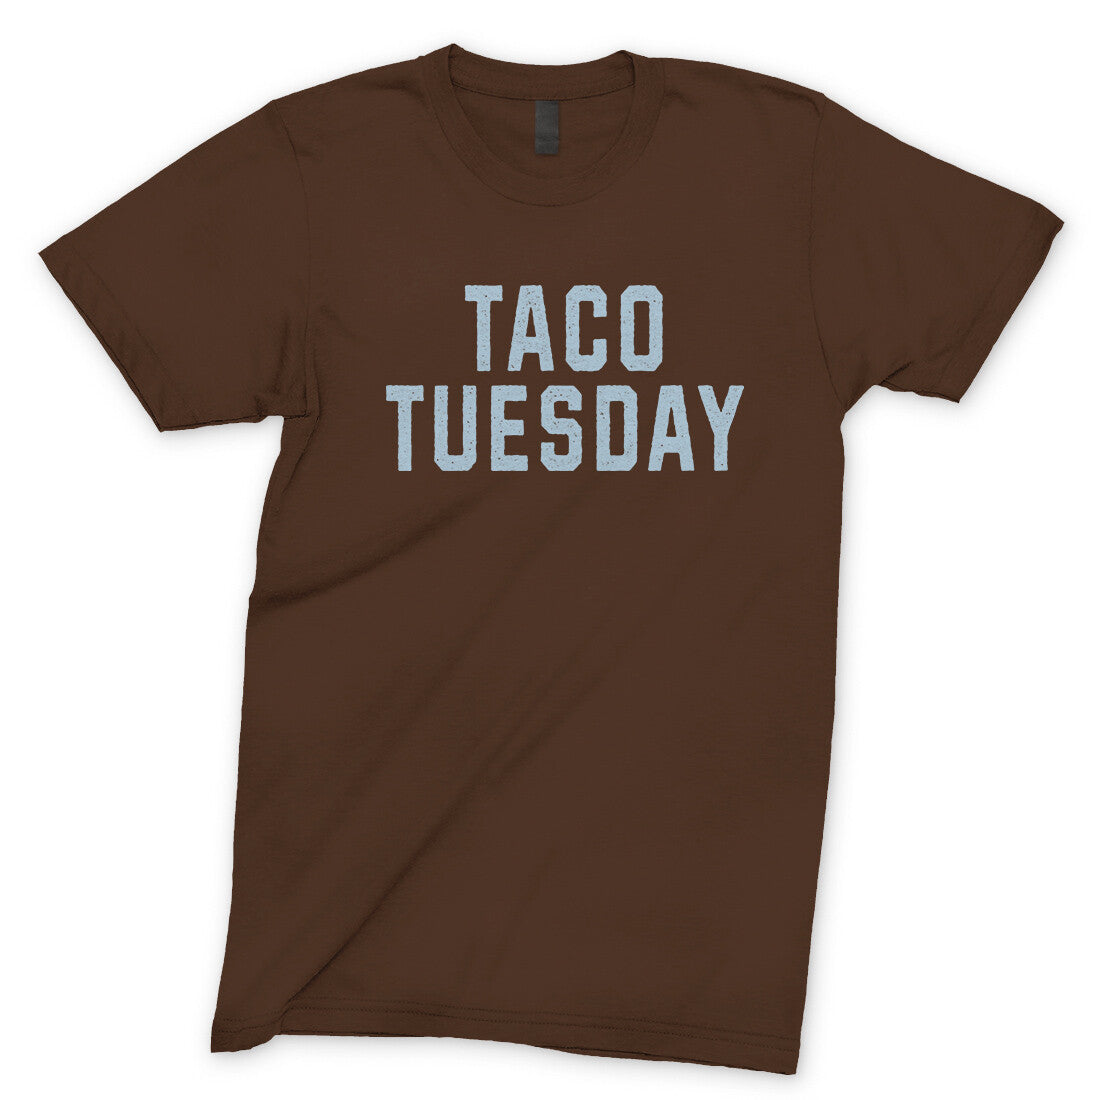 Taco Tuesday in Dark Chocolate Color